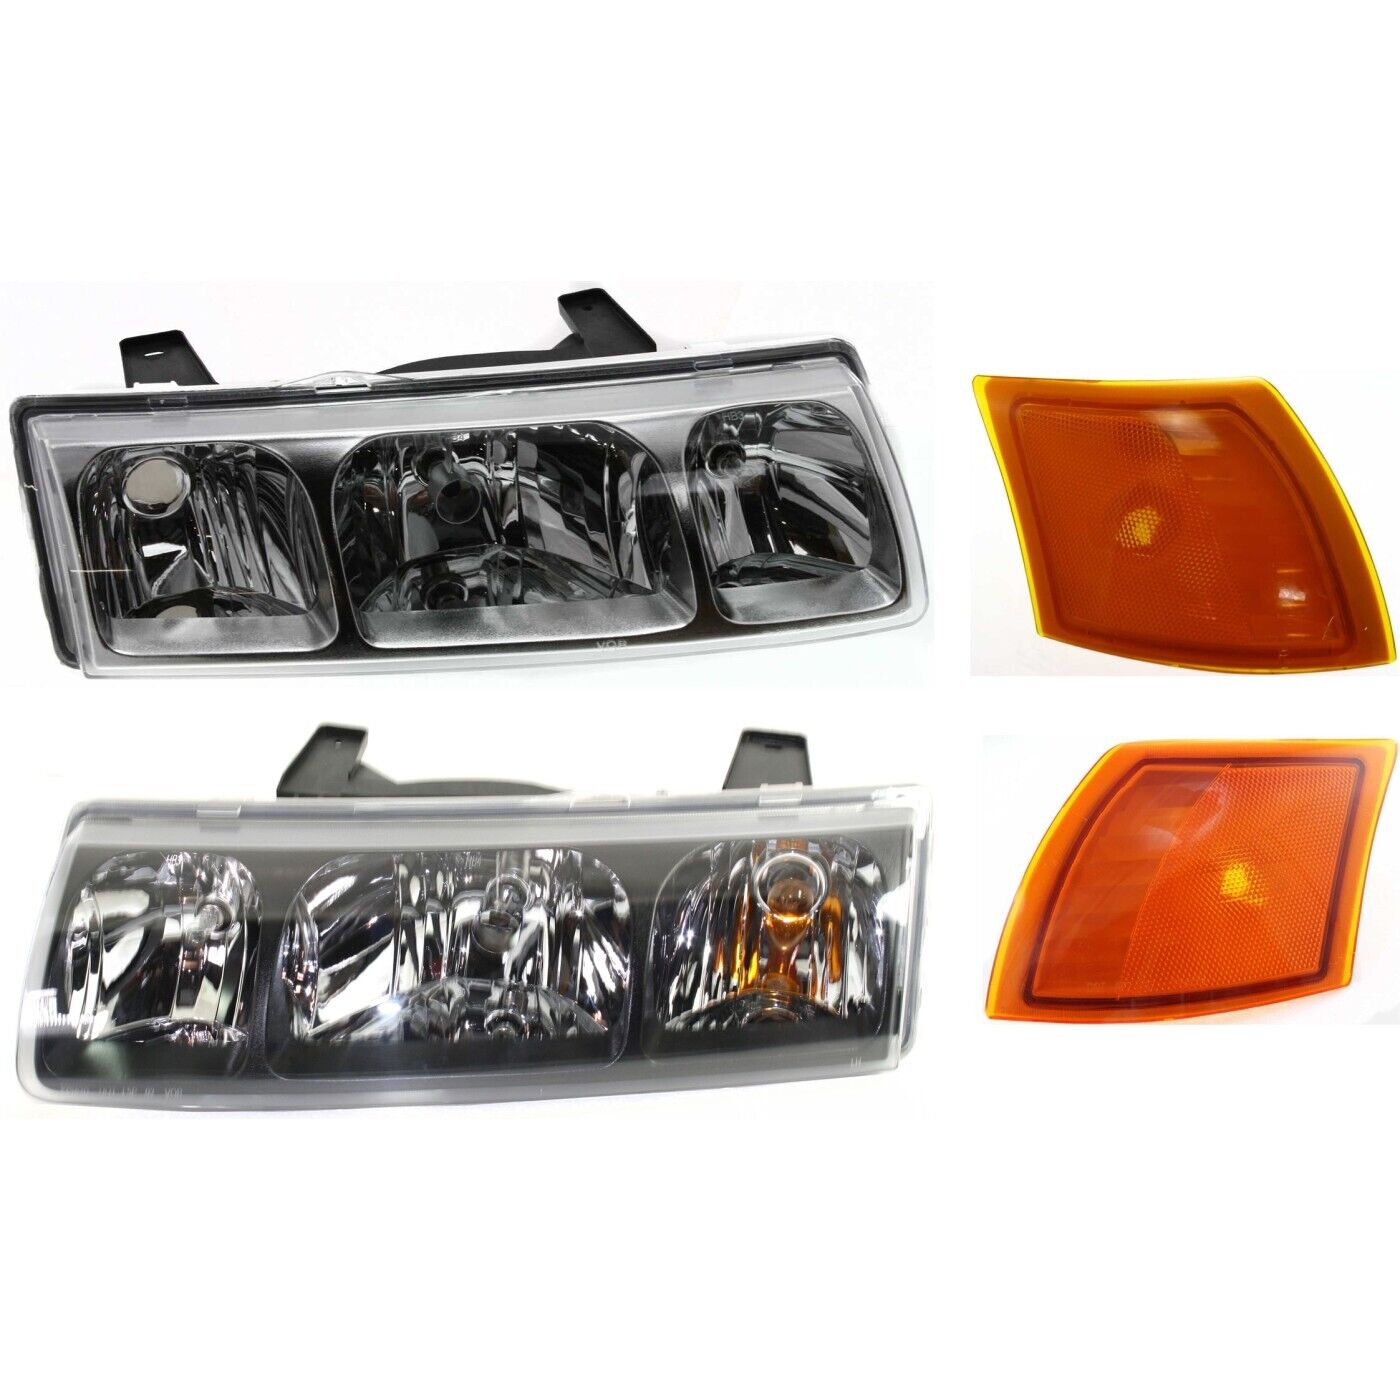 Headlight Side Marker Kit For 2002-04 Saturn Vue Front Left and Right with Bulb